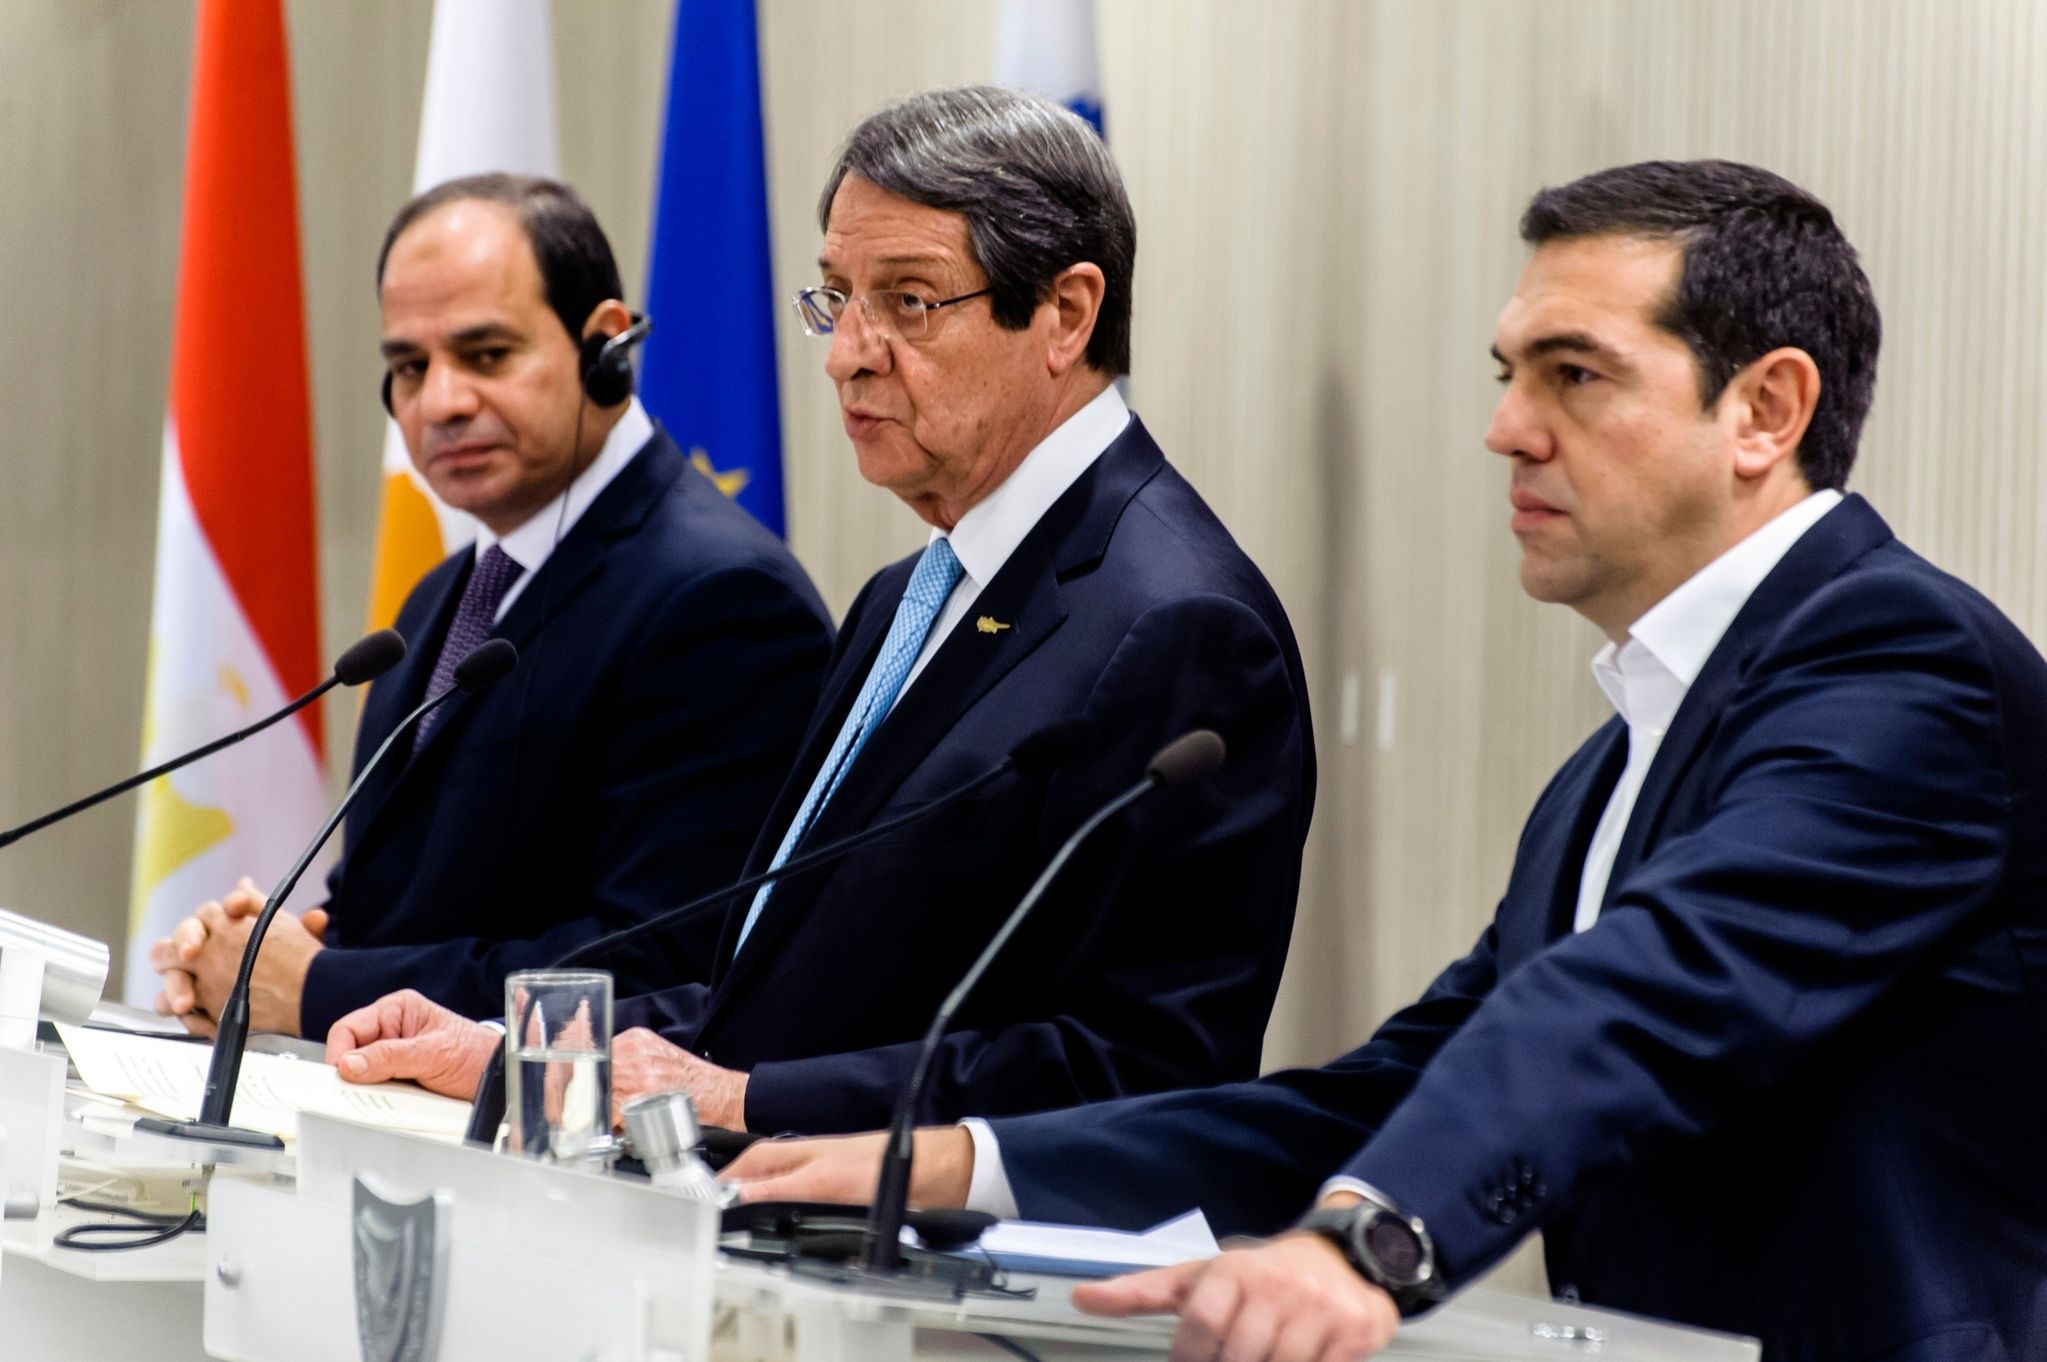 Cypriot President Nicos Anastasiades (C), Greek prime minister Alexis Tsipras and Egyptian President Abdel Fattah al-Sisi (L) attend a press conference at the presidential palace in Nicosia on Nov. 21, 2017. (AFP Photo)